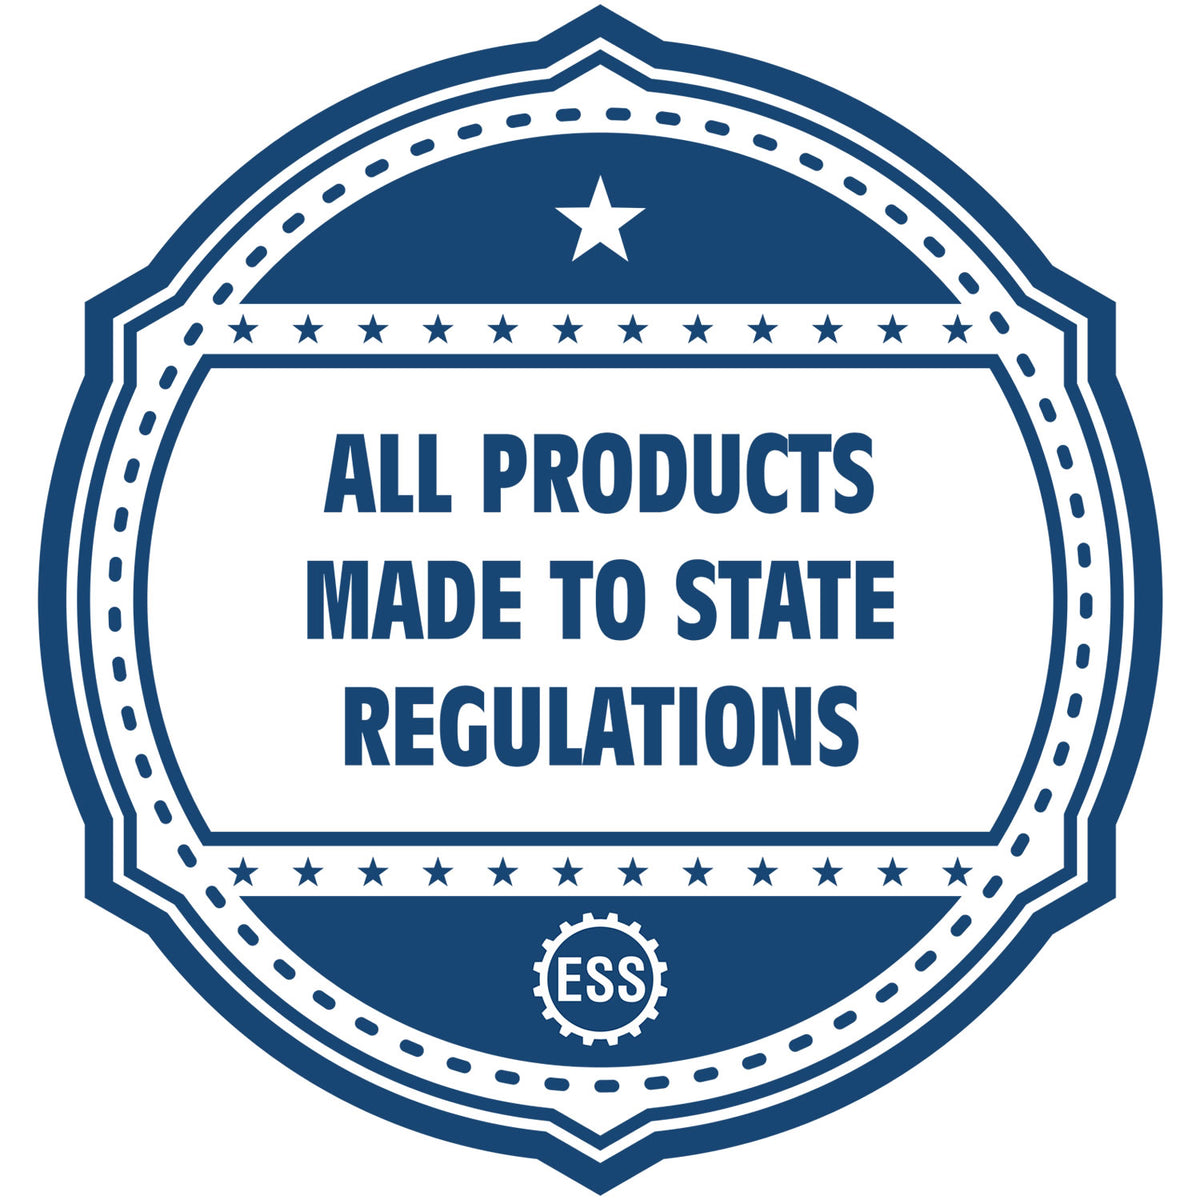 An icon or badge element for the Heavy Duty Cast Iron South Dakota Engineer Seal Embosser showing that this product is made in compliance with state regulations.